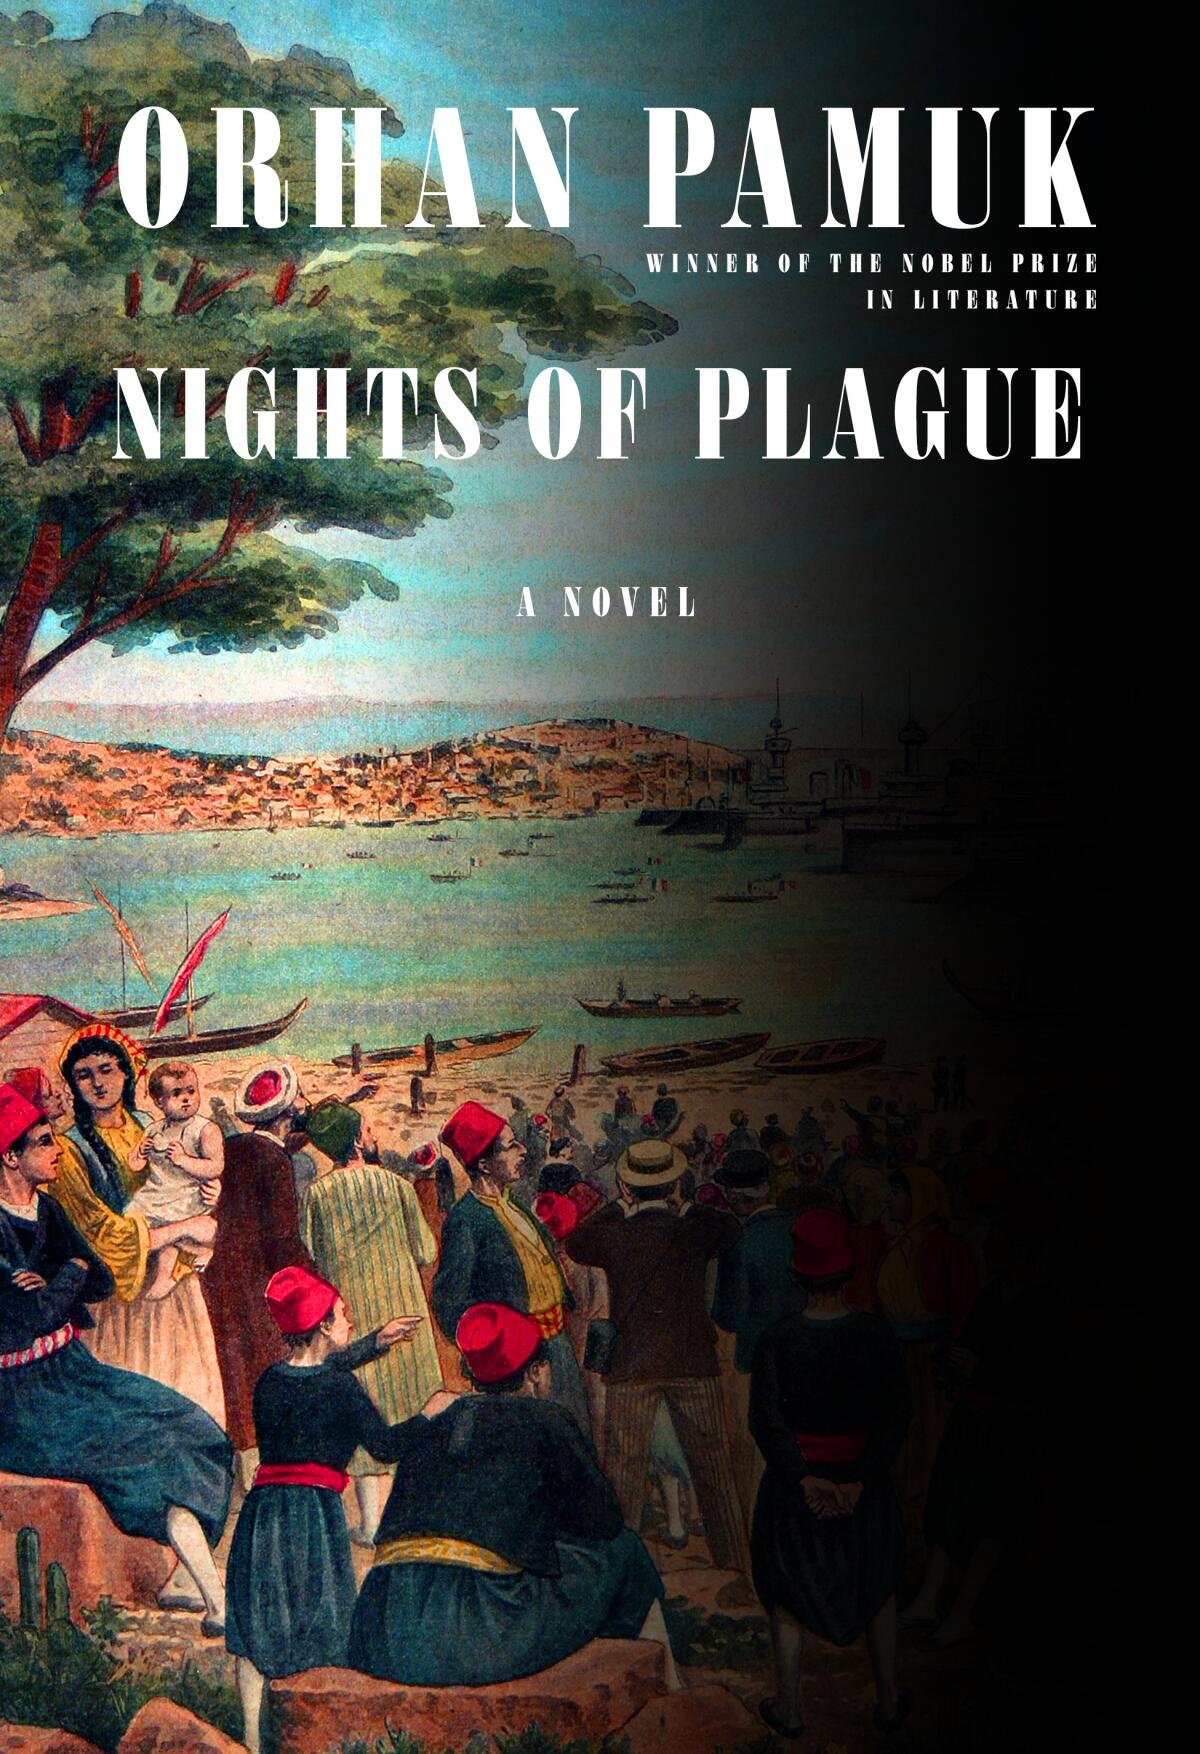 The cover of "Nights of Plague," with a black shadow partially obscuring a scene of people by the water.